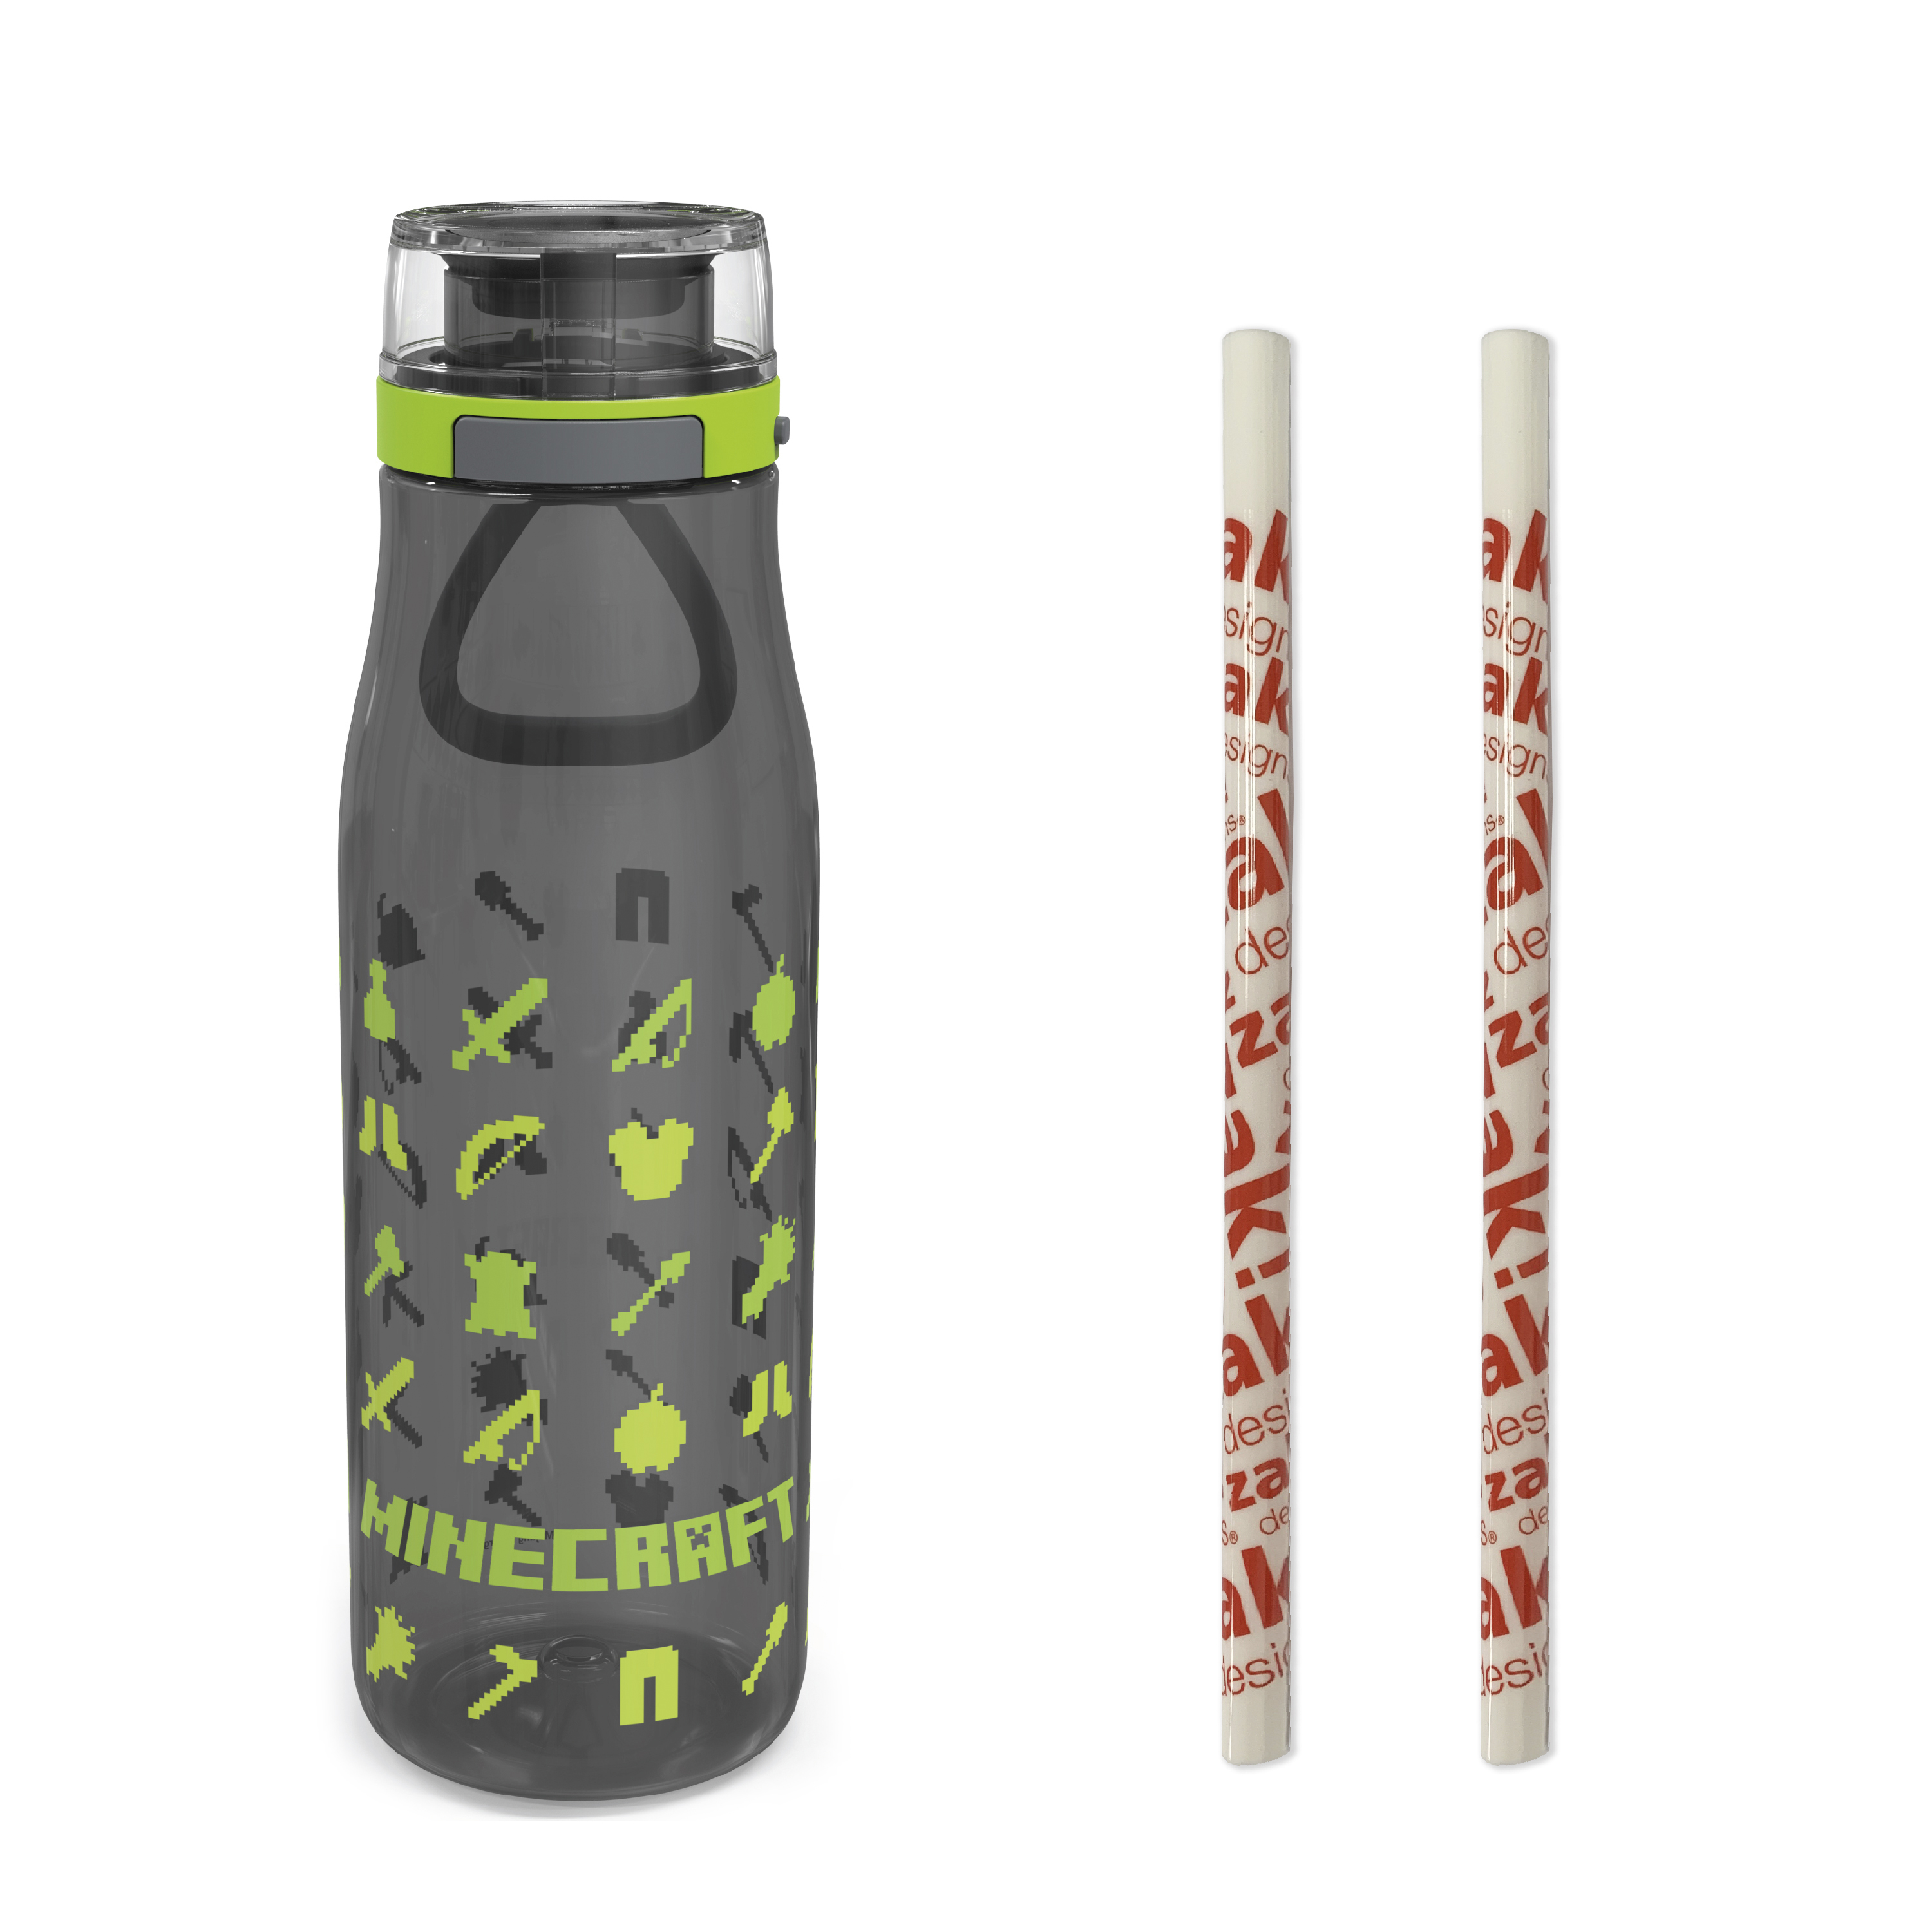 Minecraft 25 ounce Water Bottle and Straws, Weapons and Tools, 3-piece set slideshow image 1